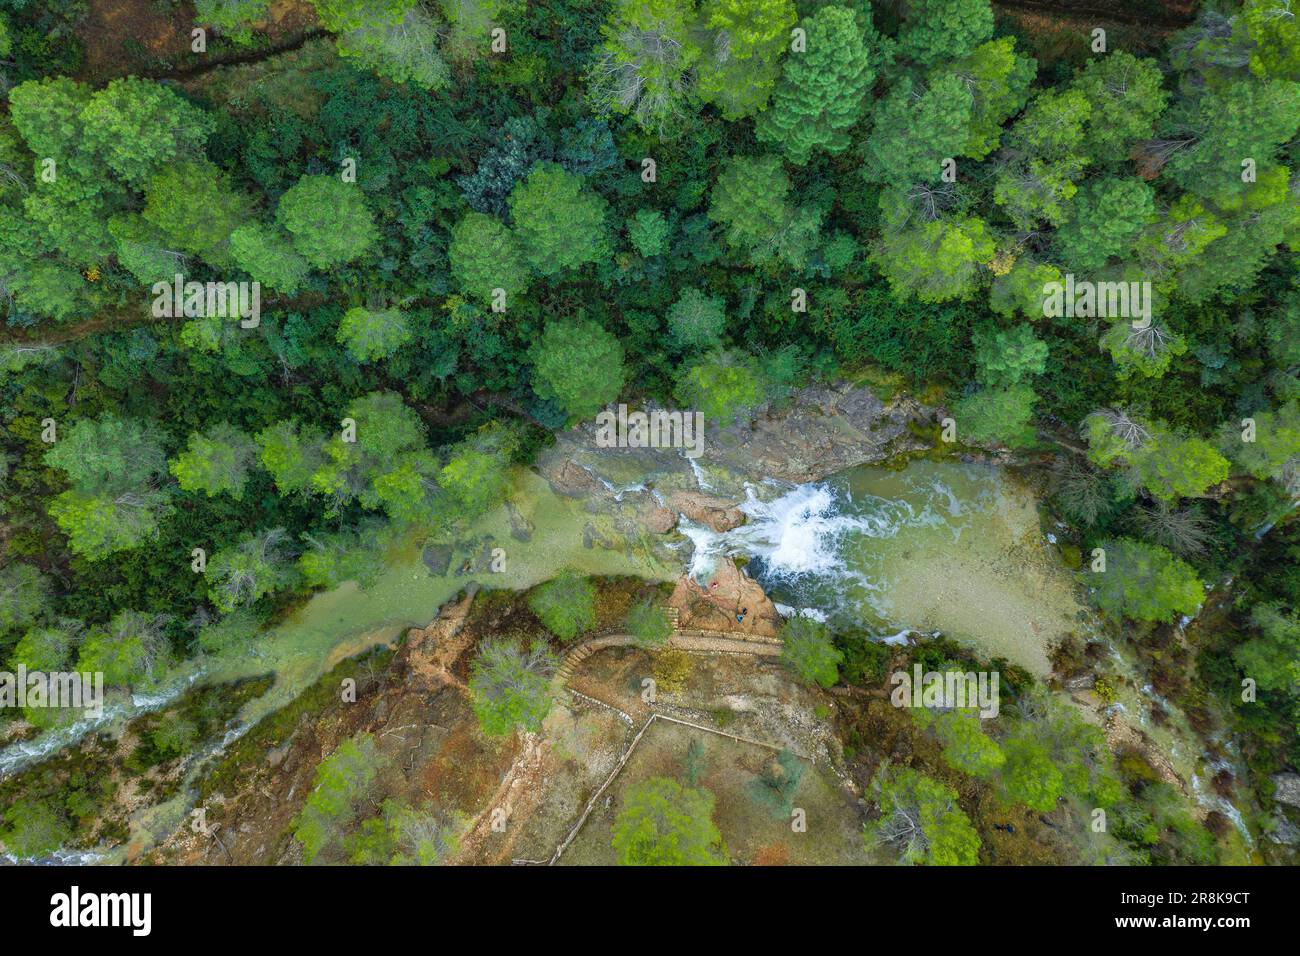 Zenithal aerial view of the Toll del Vidre in the Algars river, in the Els Ports / Los Puertos natural park, with a large flow after heavy rains Stock Photo